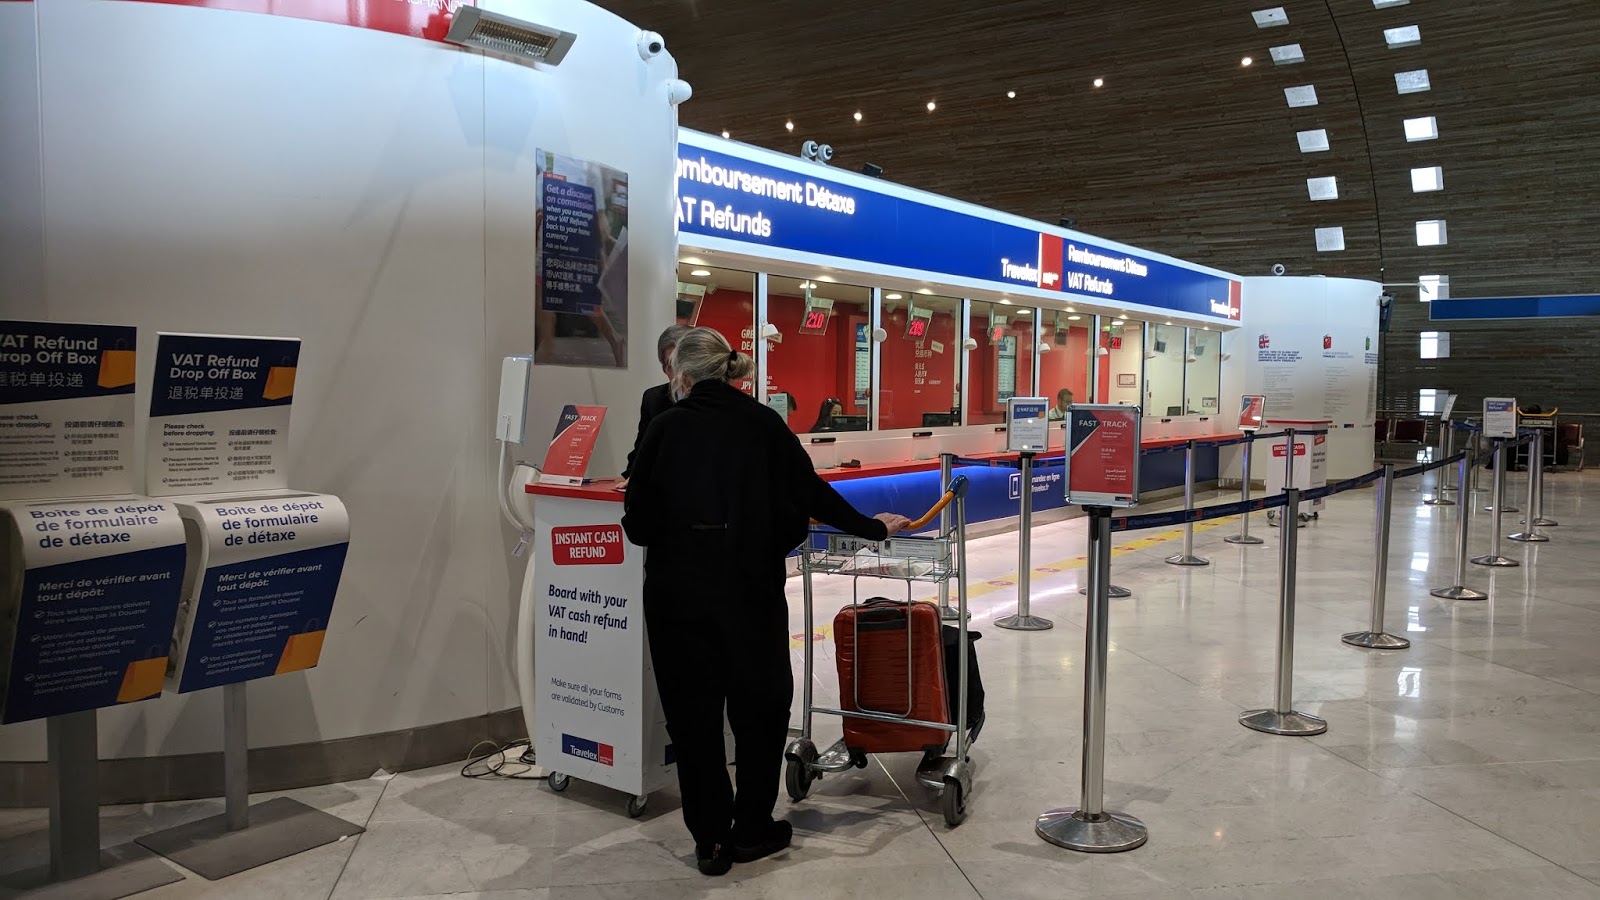 The Travelex Counter at Charles De Gaulle Airport, Paris, France